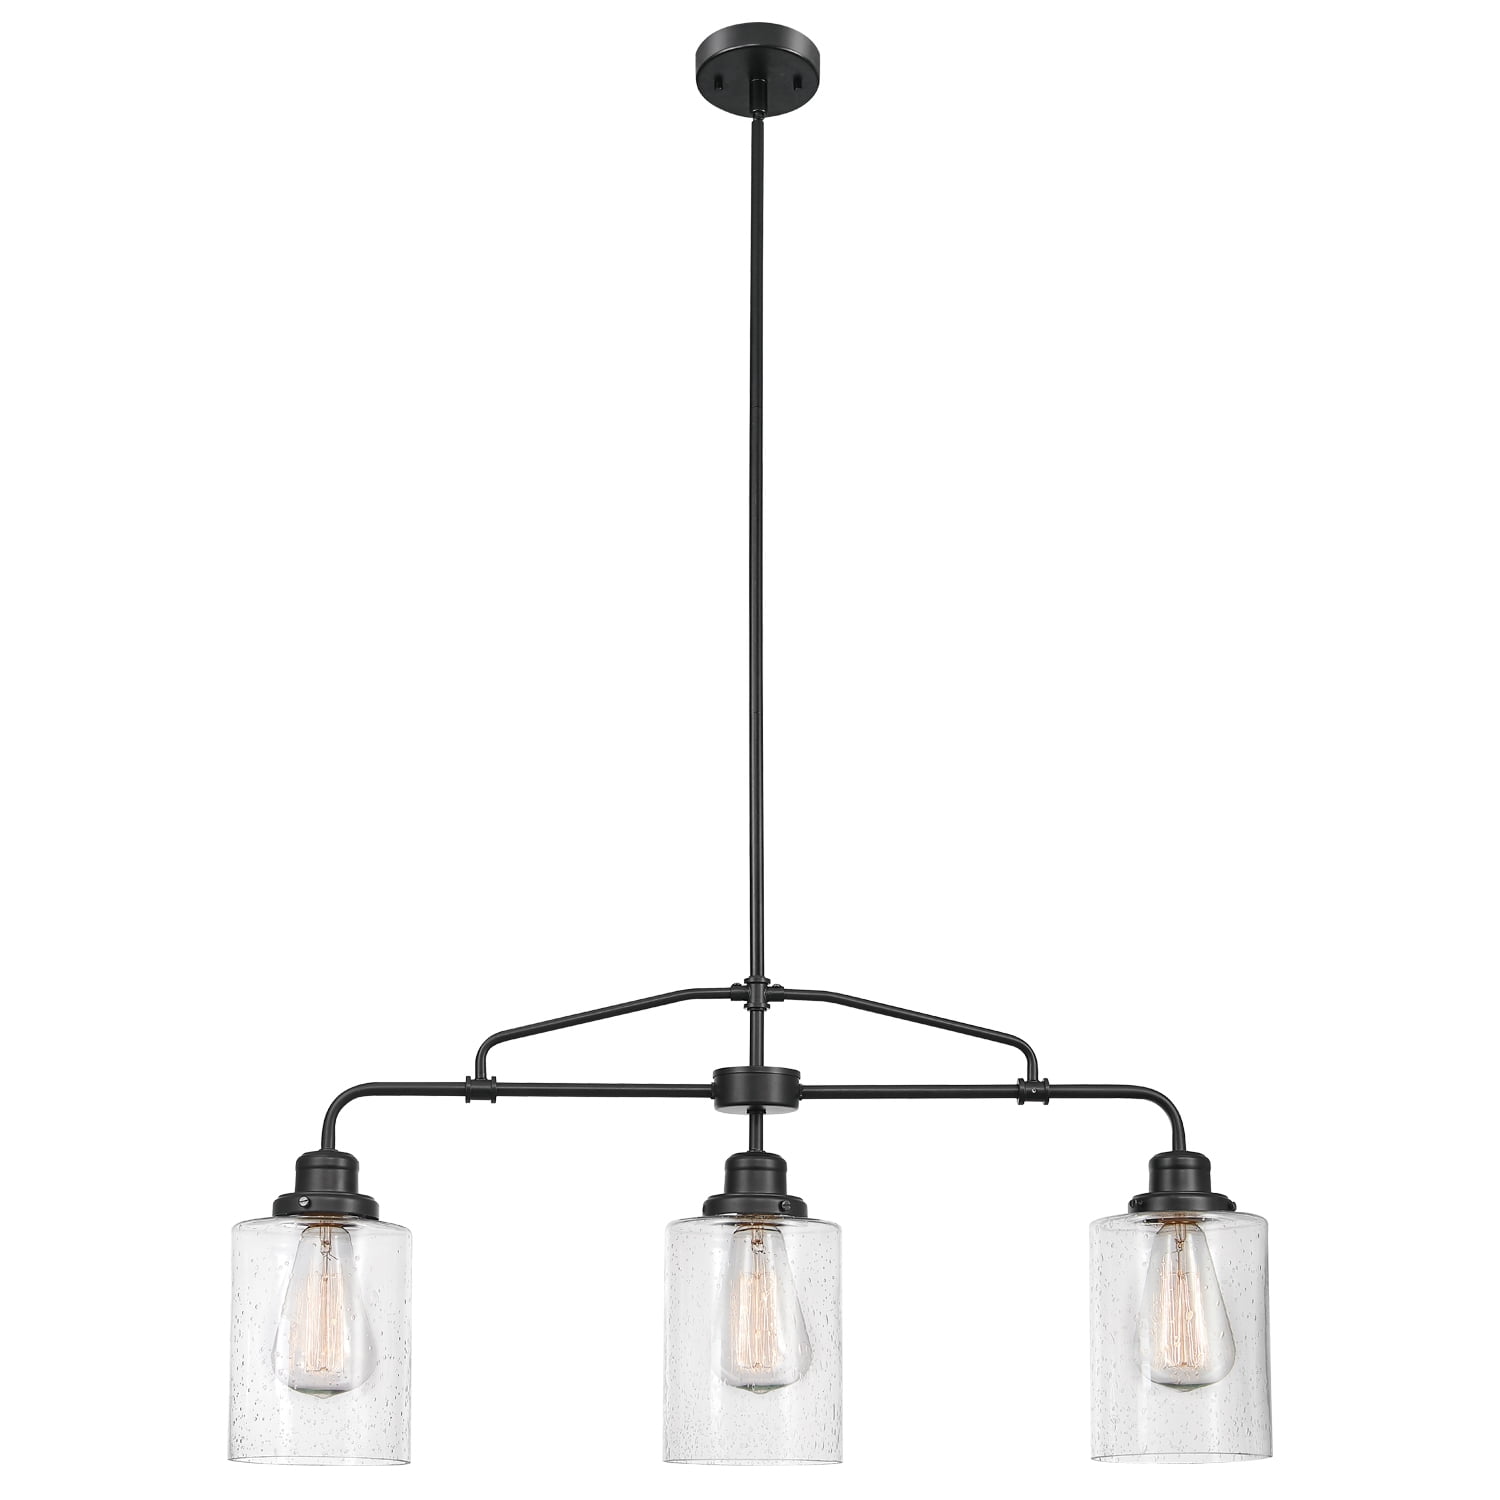 Wood Style Linear Metal Frame Oil Rubbed Bronze Kira Home Brentwood 30 6-Light Rustic Kitchen Island Light Pendant Chandelier Walnut Style Finish Seeded Glass Shades 